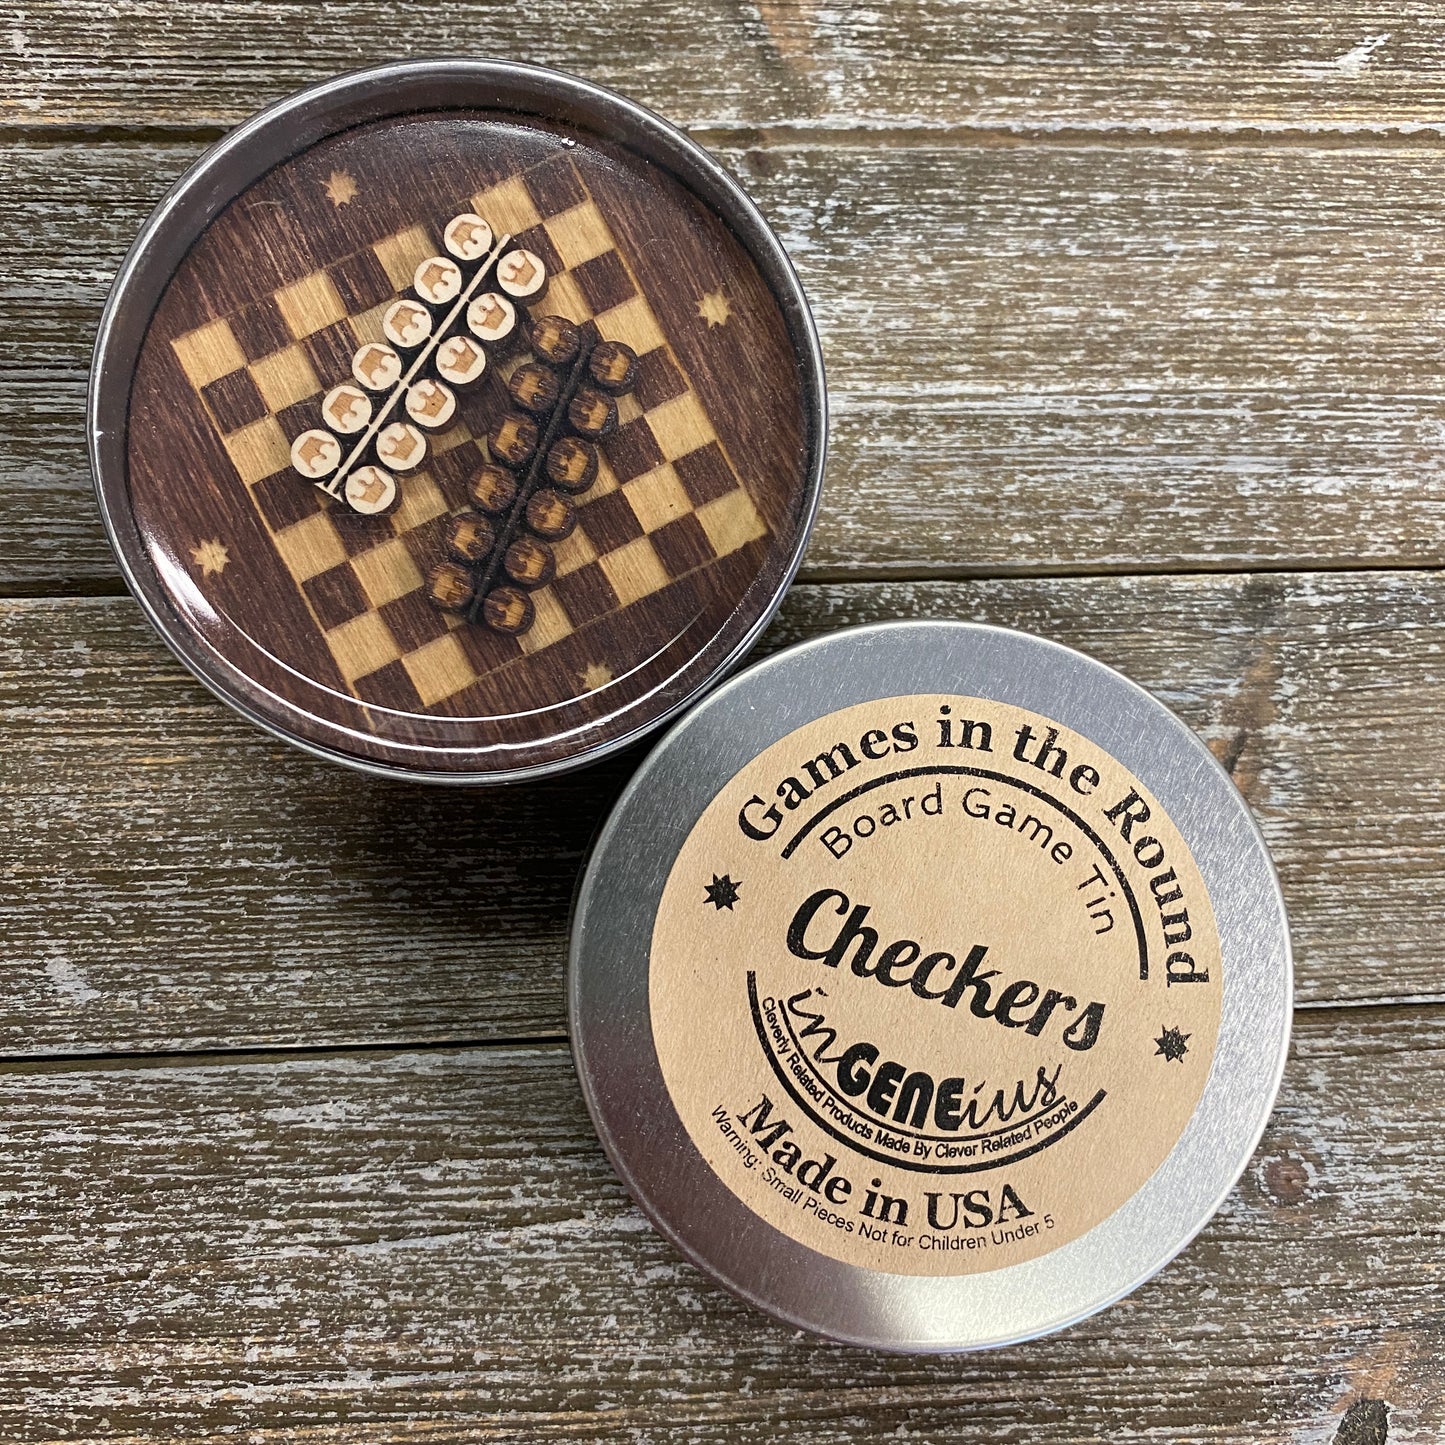 Games in the Round - Checkers